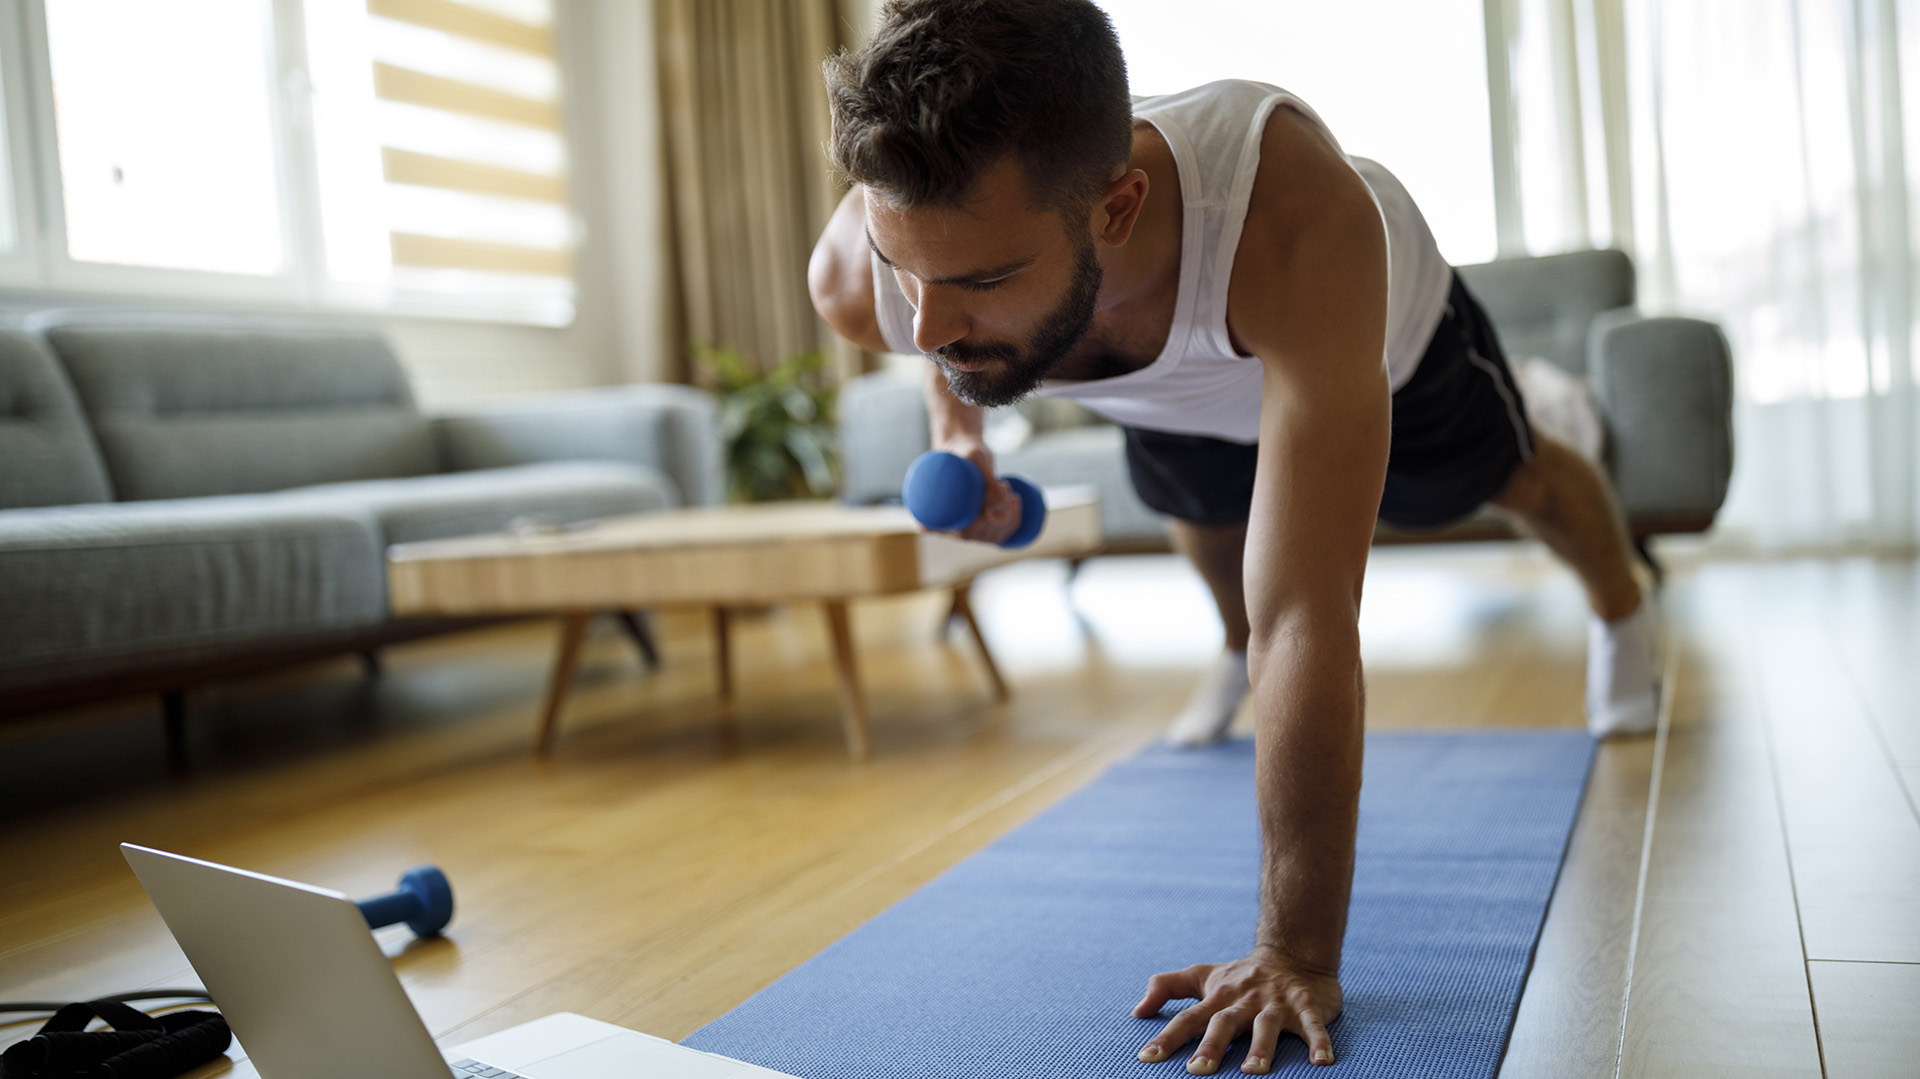 Evening exercise is ideal for men interested in improving heart and metabolic health, as well as emotional well-being, as found in the study (Getty)